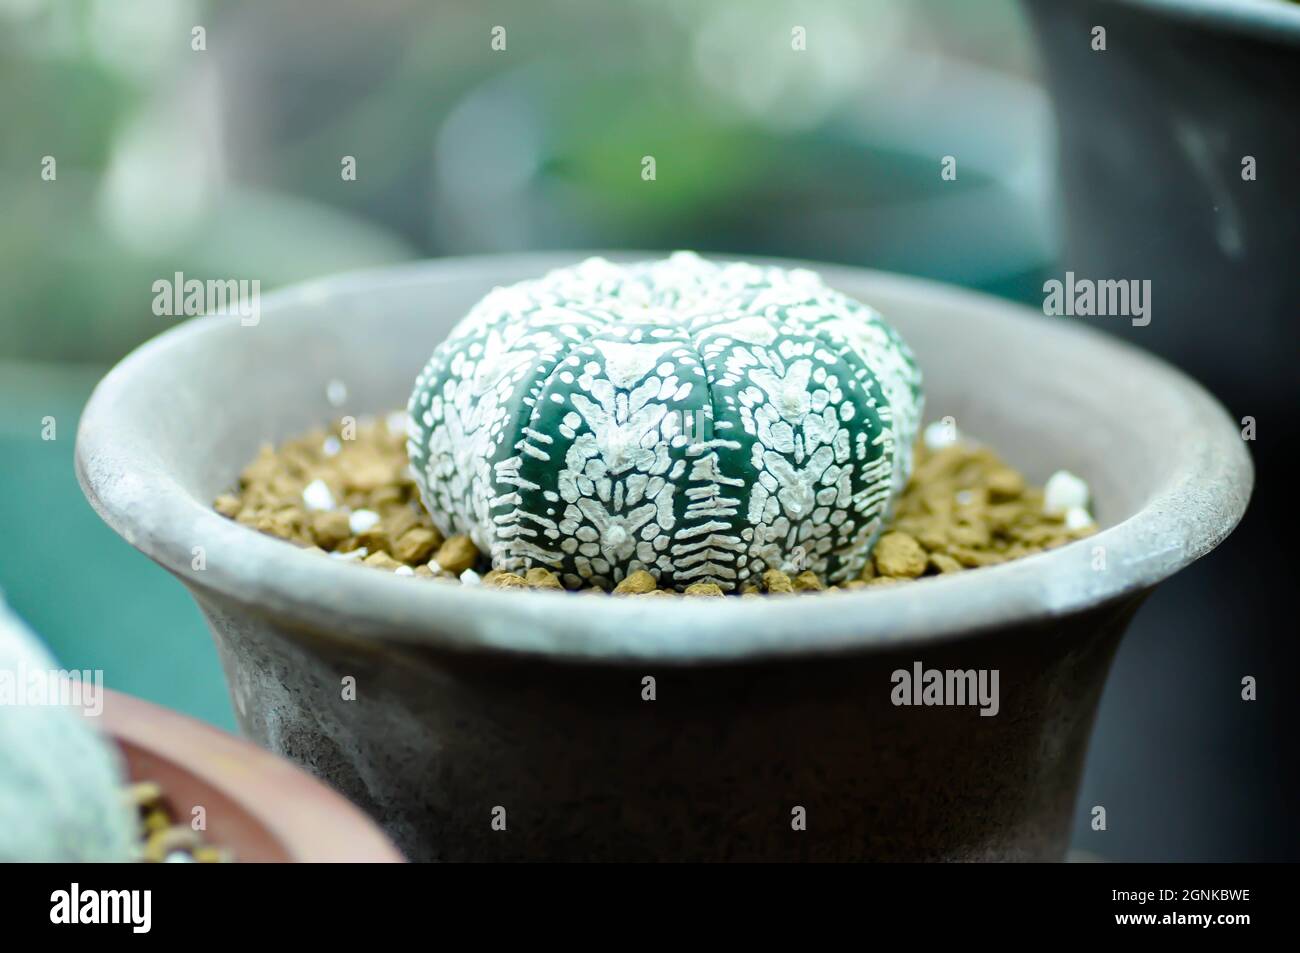 astrophy, astrophy kabuta or astrophy asterias miracle kabuta or cactus in the flower pot Stock Photo